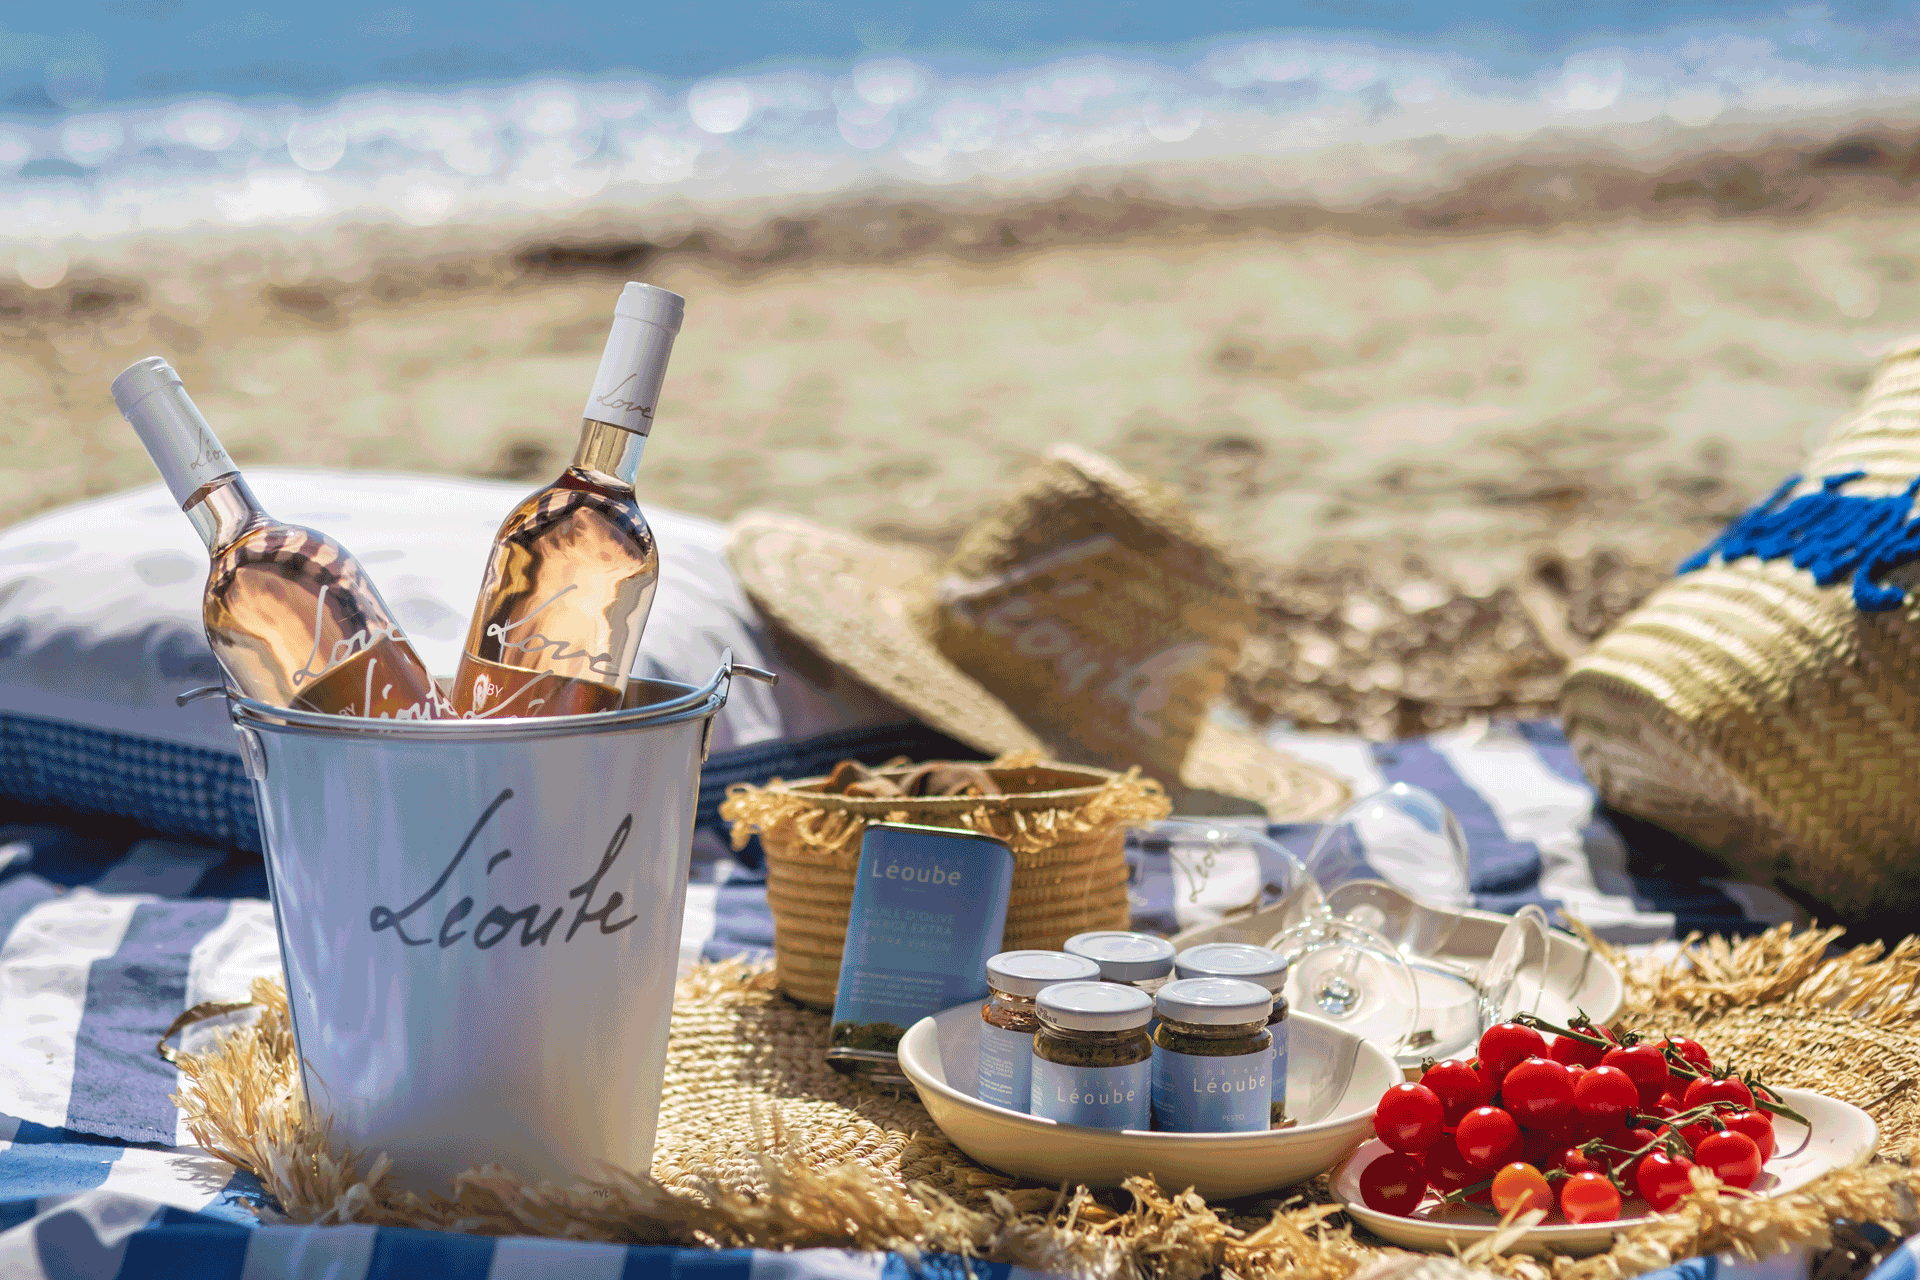 Leoube hamper on the beach, with wine, snacks and picnic blankets.